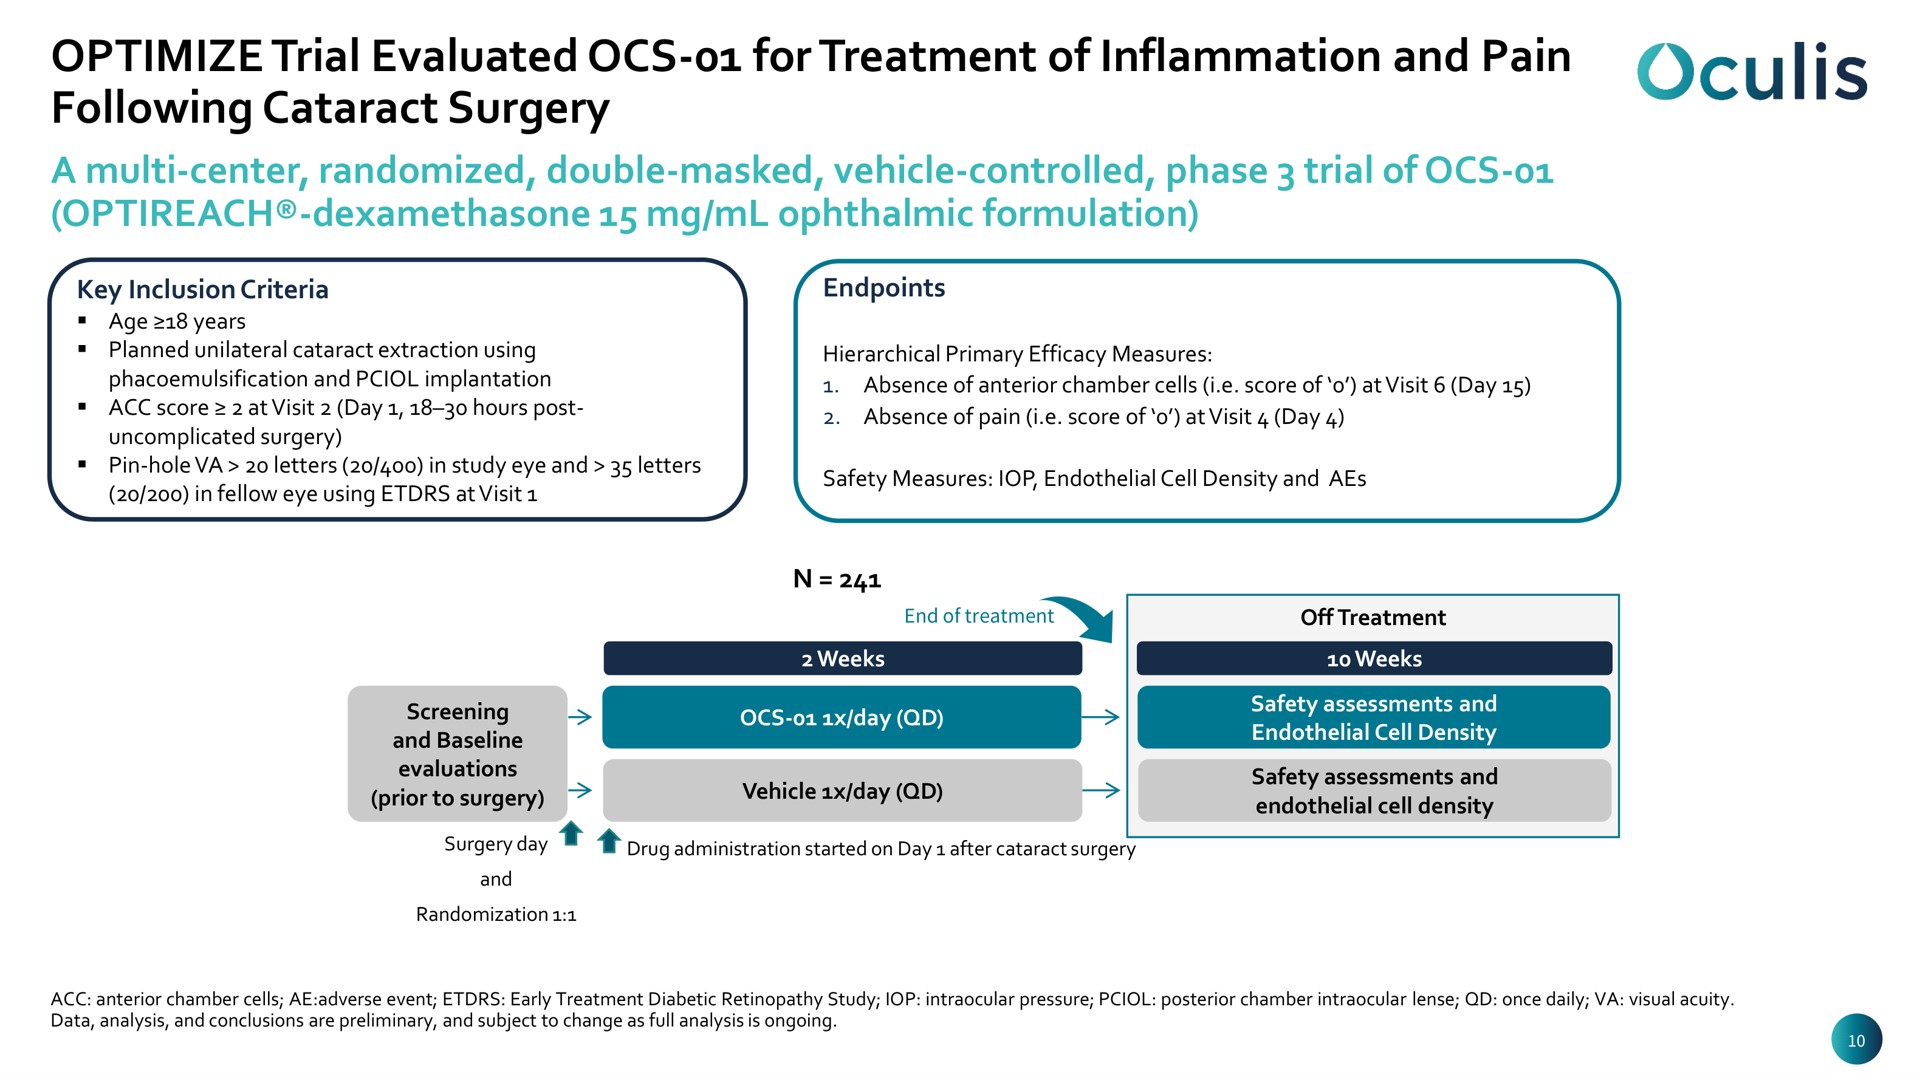 optimize trial evaluated for treatment of inflammation and pain following cataract surgery | Oculis